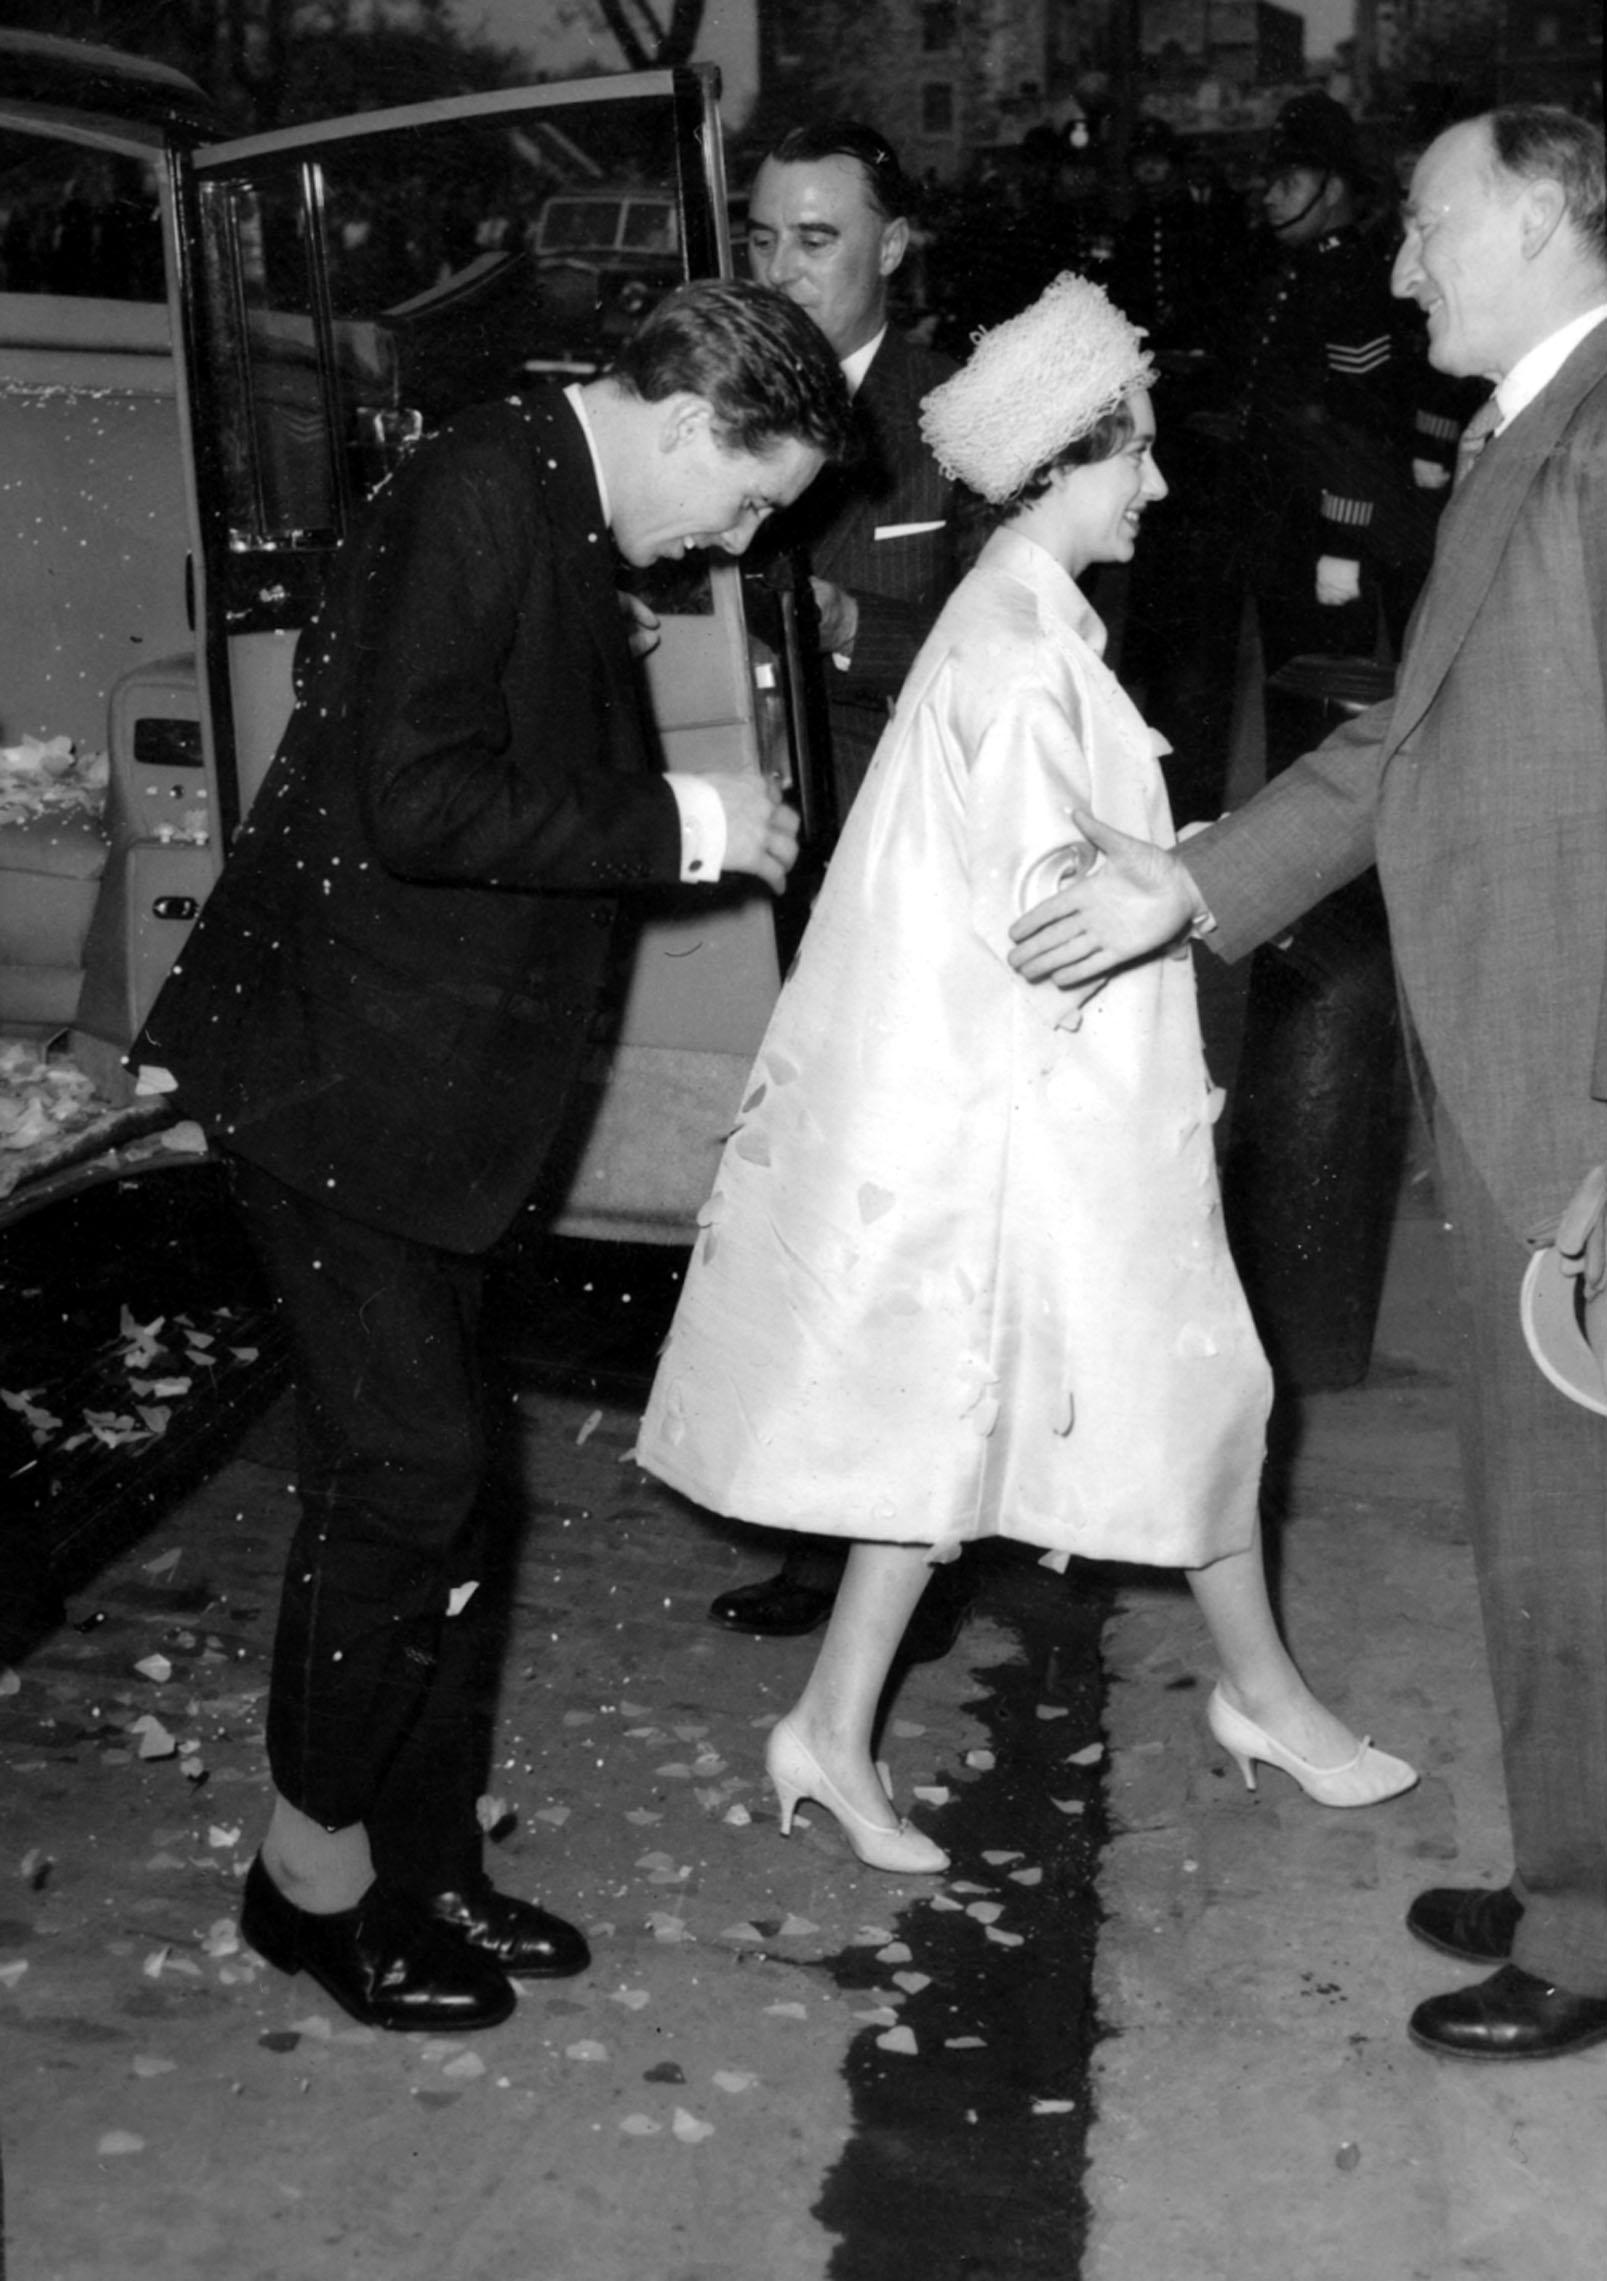 Antony Armstrong-Jones brushes vigorously at the confetti and rose petals which cling to him as he and his bride, Princess Margaret, are welcomed at Tower Pier by Viscount Simon, Chairman of the Port of London Authority, prior to the embarkation in the Royal Yacht Britannia and their West Indies honeymoon.